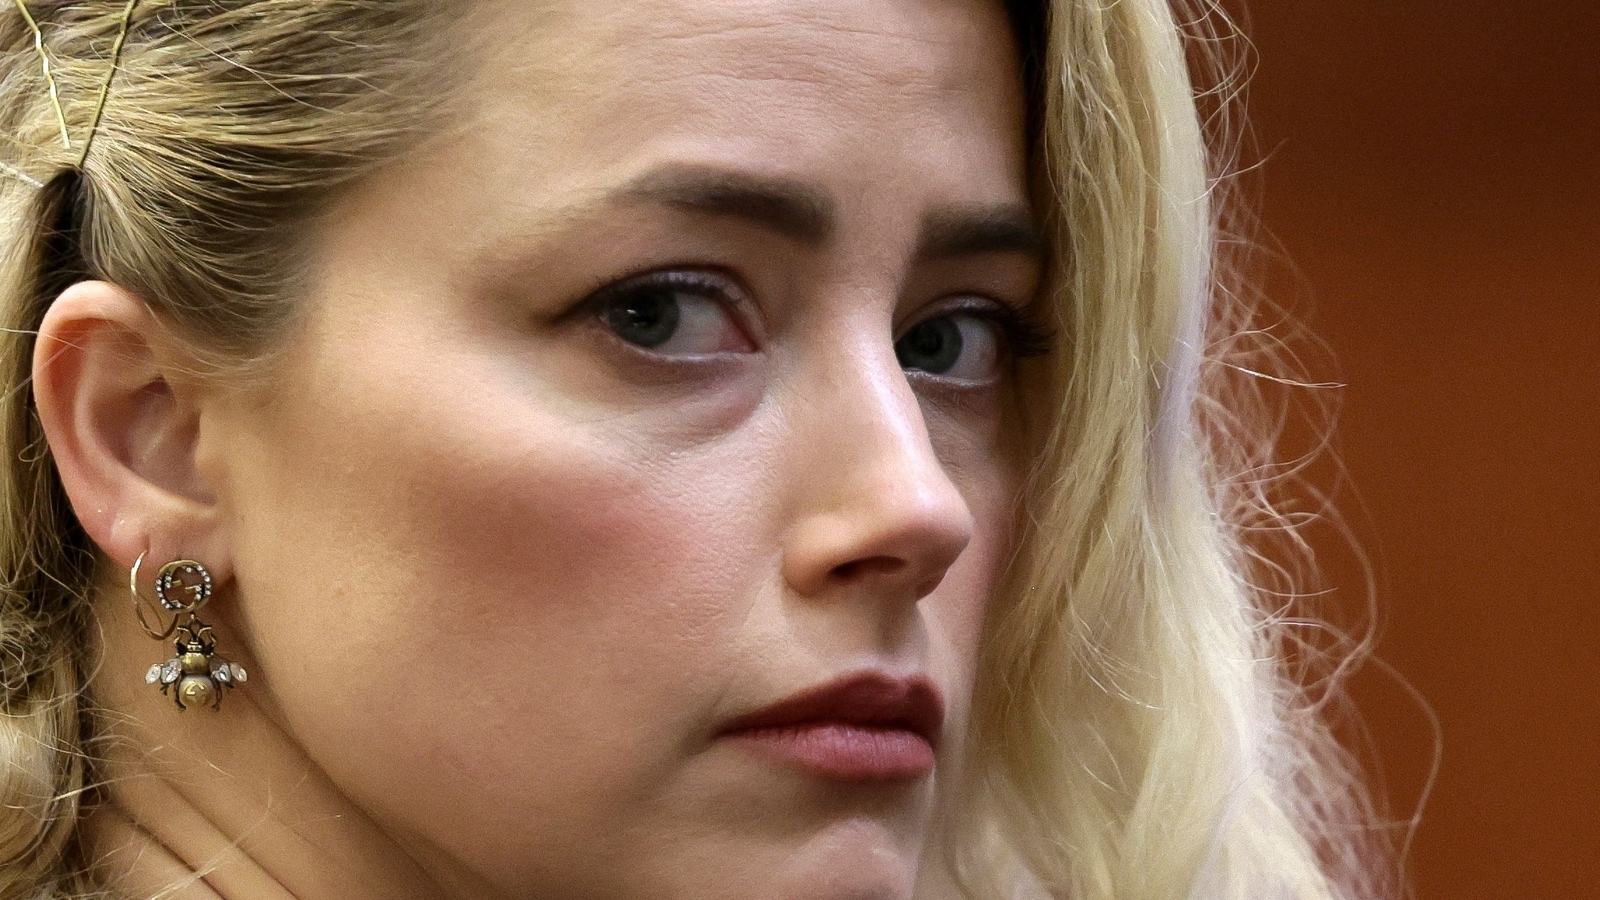 Amber Heard says she did ‘horrible, regrettable things’ while she was married to Johnny Depp: ‘I have so much regret’